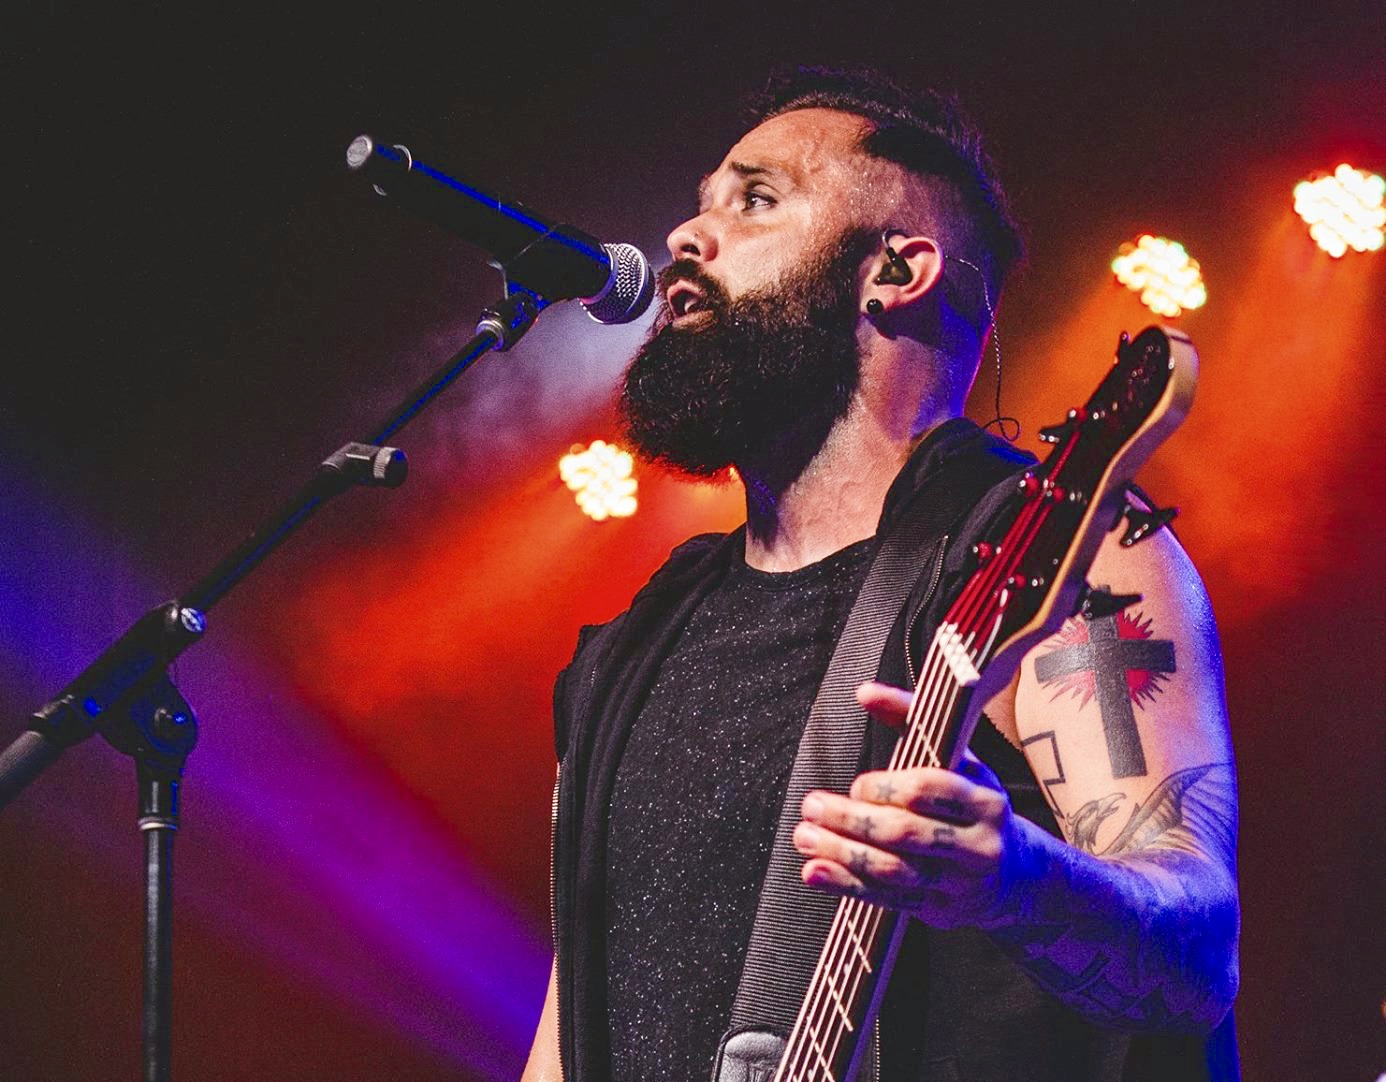 "We need to value truth over feeling. Truth over emotion," urges Skillet's lead singer, John Cooper. Photo by Joelle Kool, taken from Skillet Music's Facebook page.